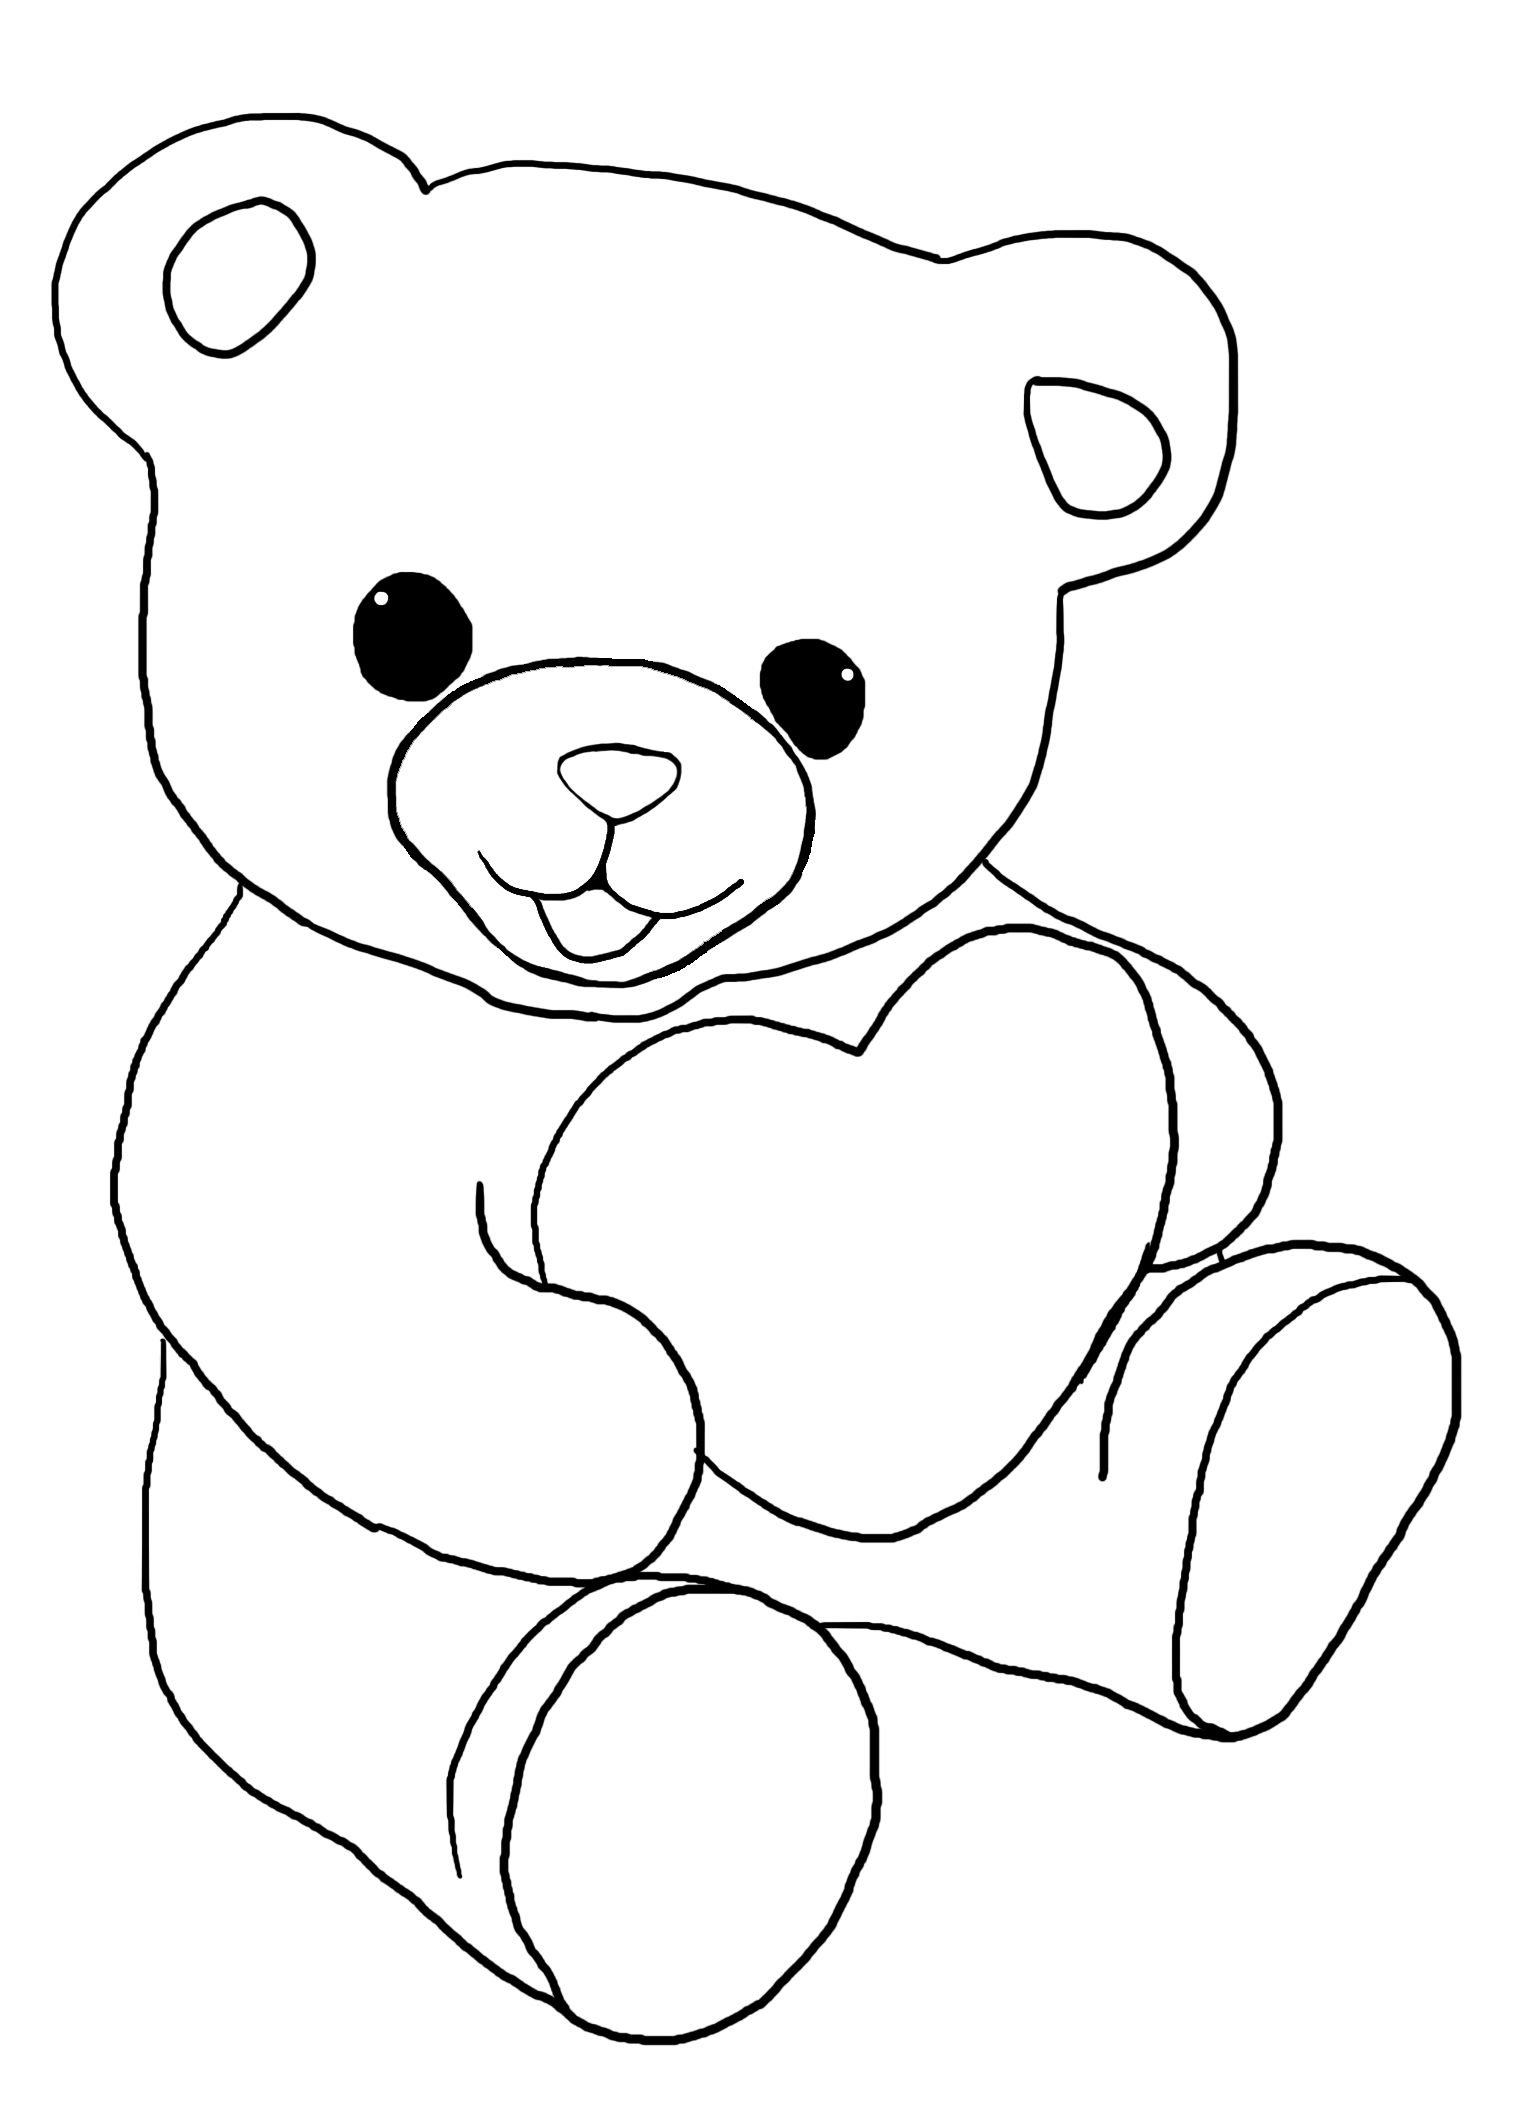 Teddy bear with a heart for coloring for kids